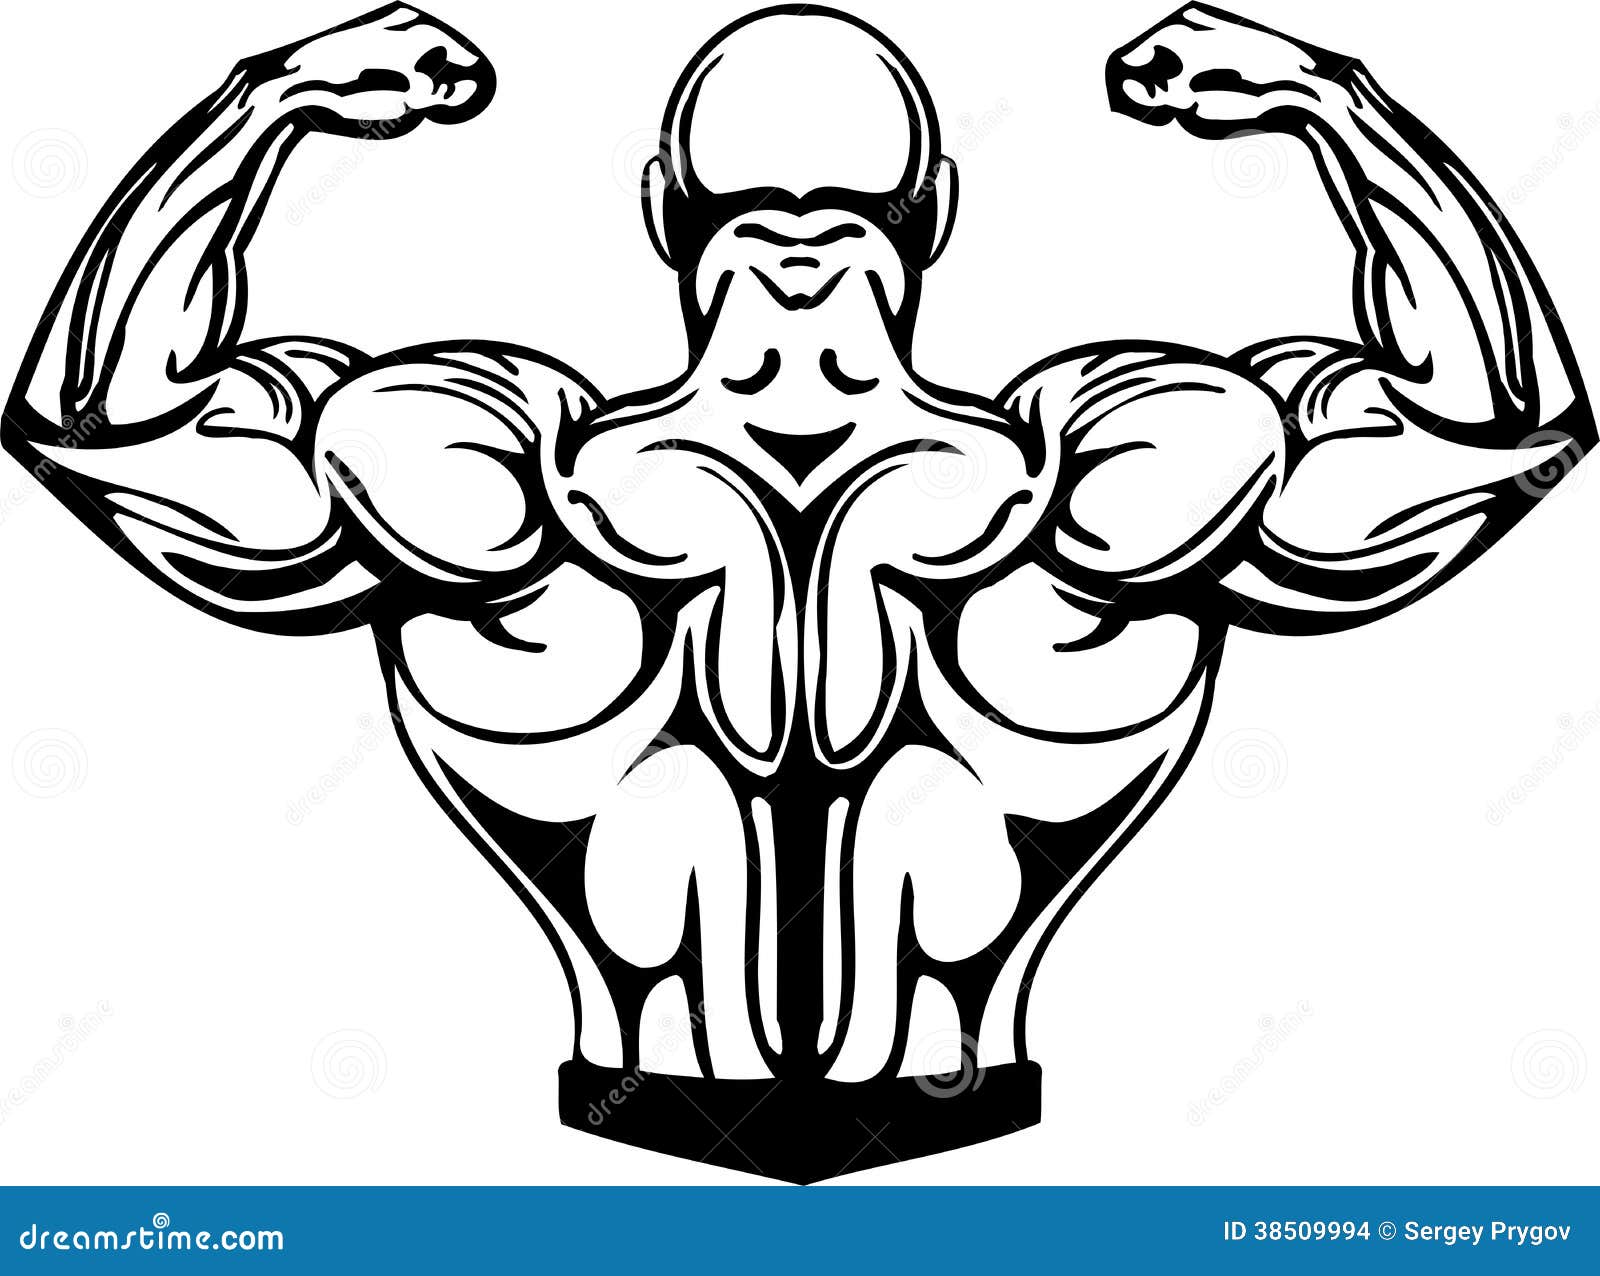 clipart powerlifting - photo #48